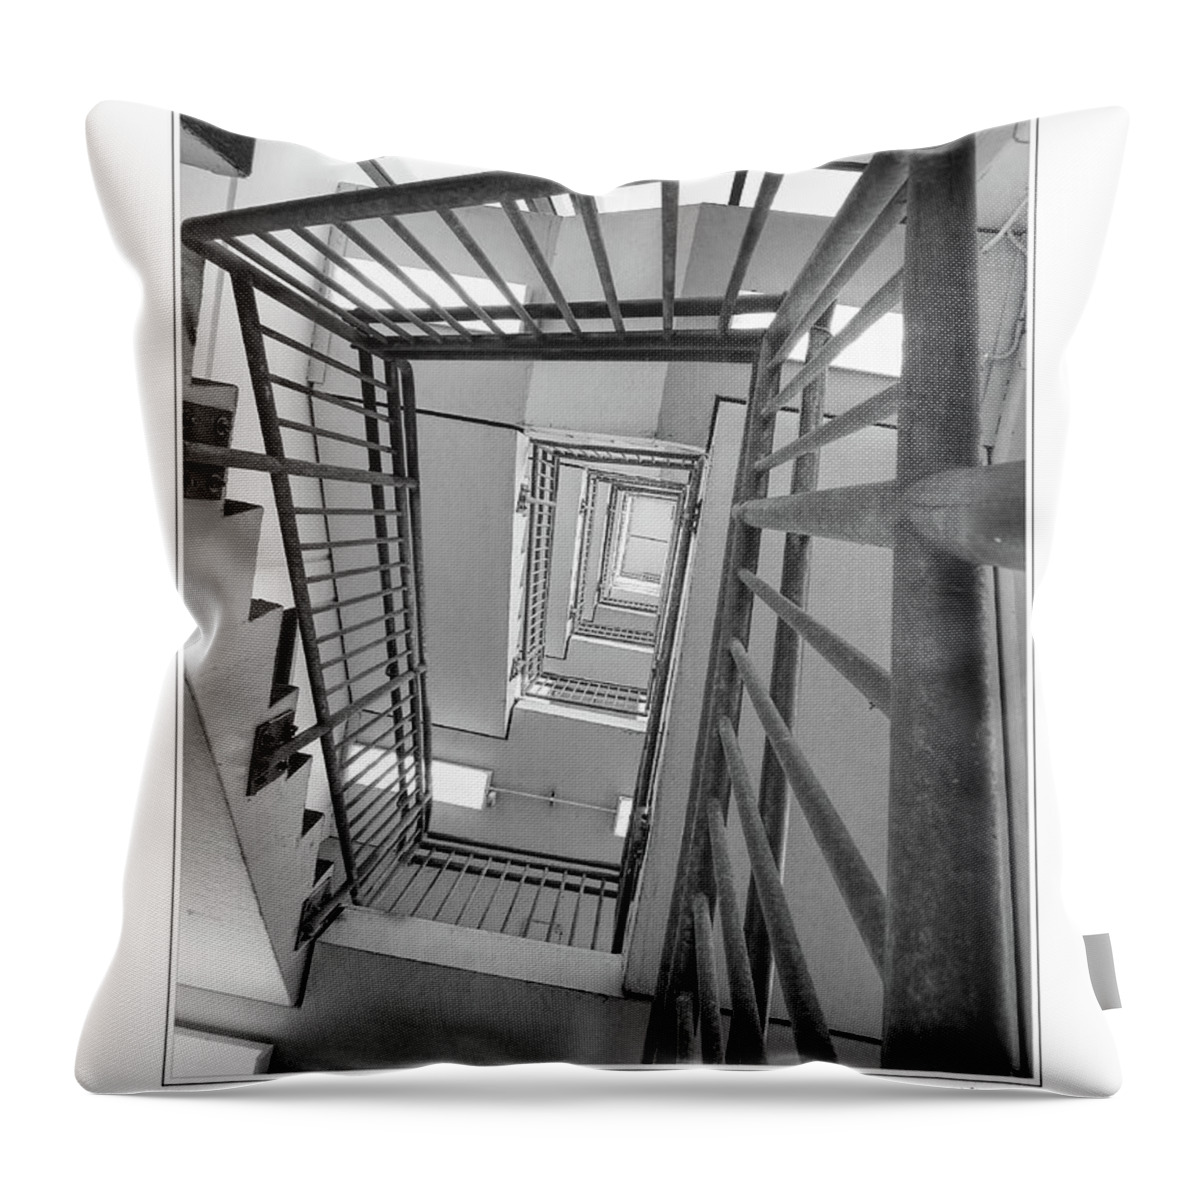 Photography Throw Pillow featuring the photograph Climbing Stairs by Phil Perkins